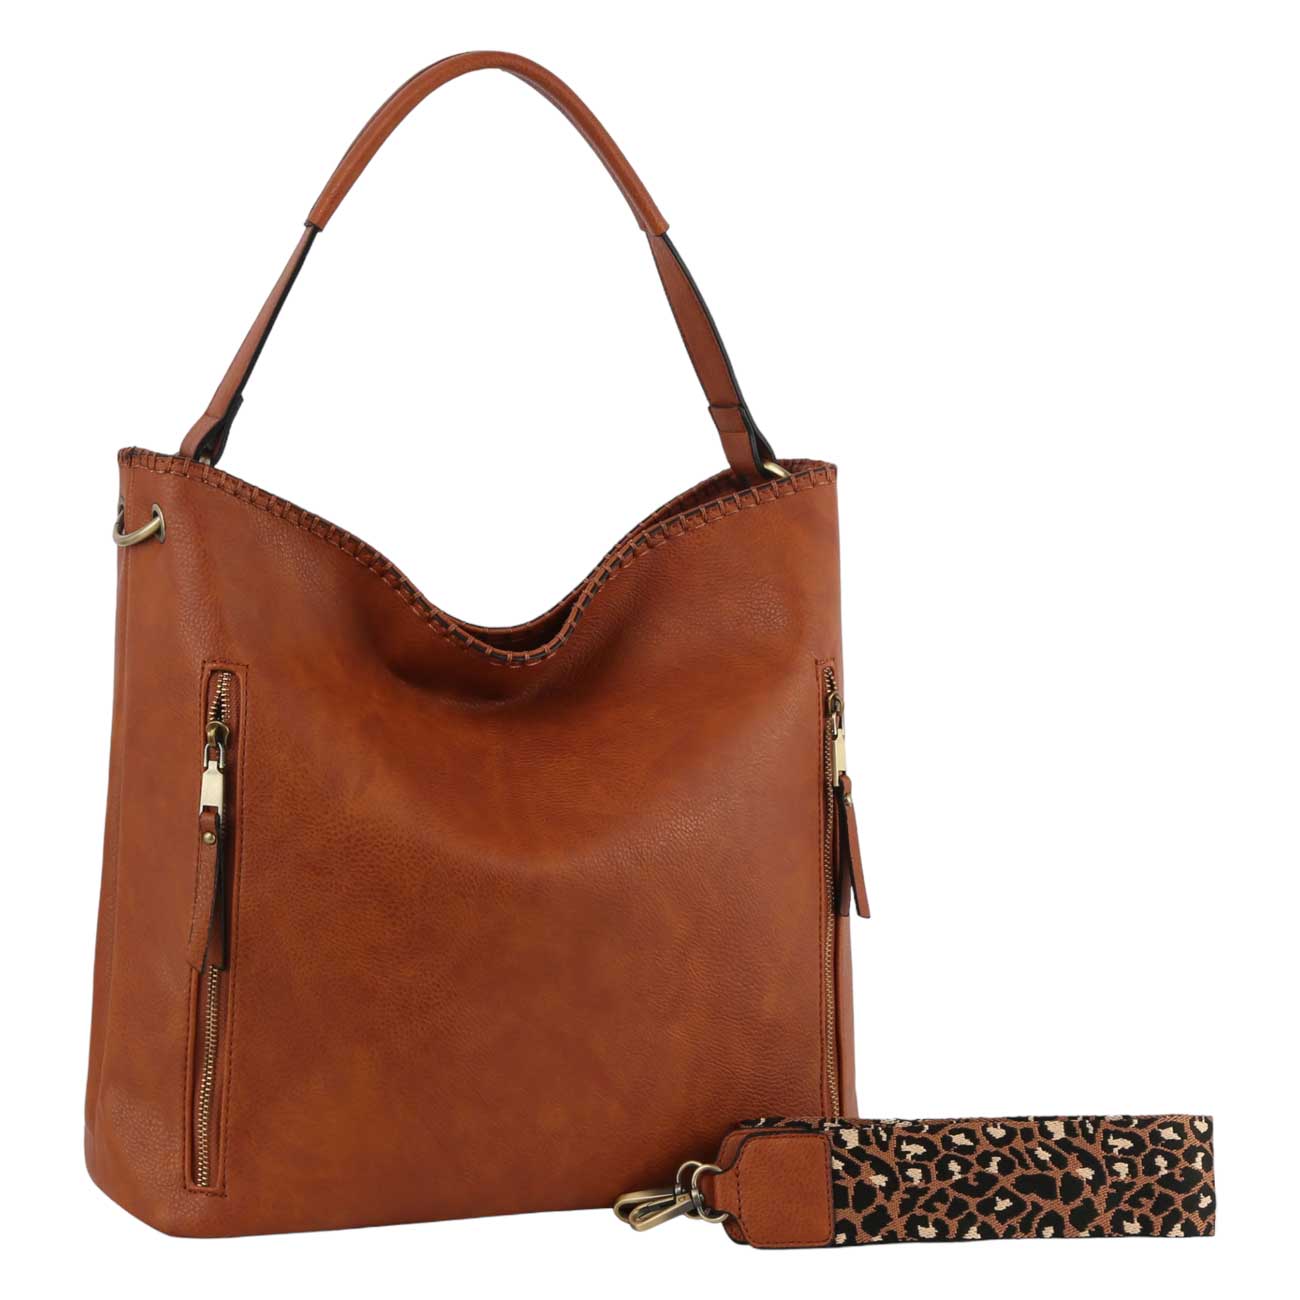 Brown Faux Leather Fashion Hobo Handbag with Guitar Strap, you can adjust according to your style can be used as crossbody. Look like the ultimate fashionista with these Hobo Handbag! Add something special to your outfit! This fashionable bag will be your new favorite accessory. Perfect Birthday Gift, Anniversary Gift, Mother's Day Gift, Graduation Gift, Valentine's Day Gift.